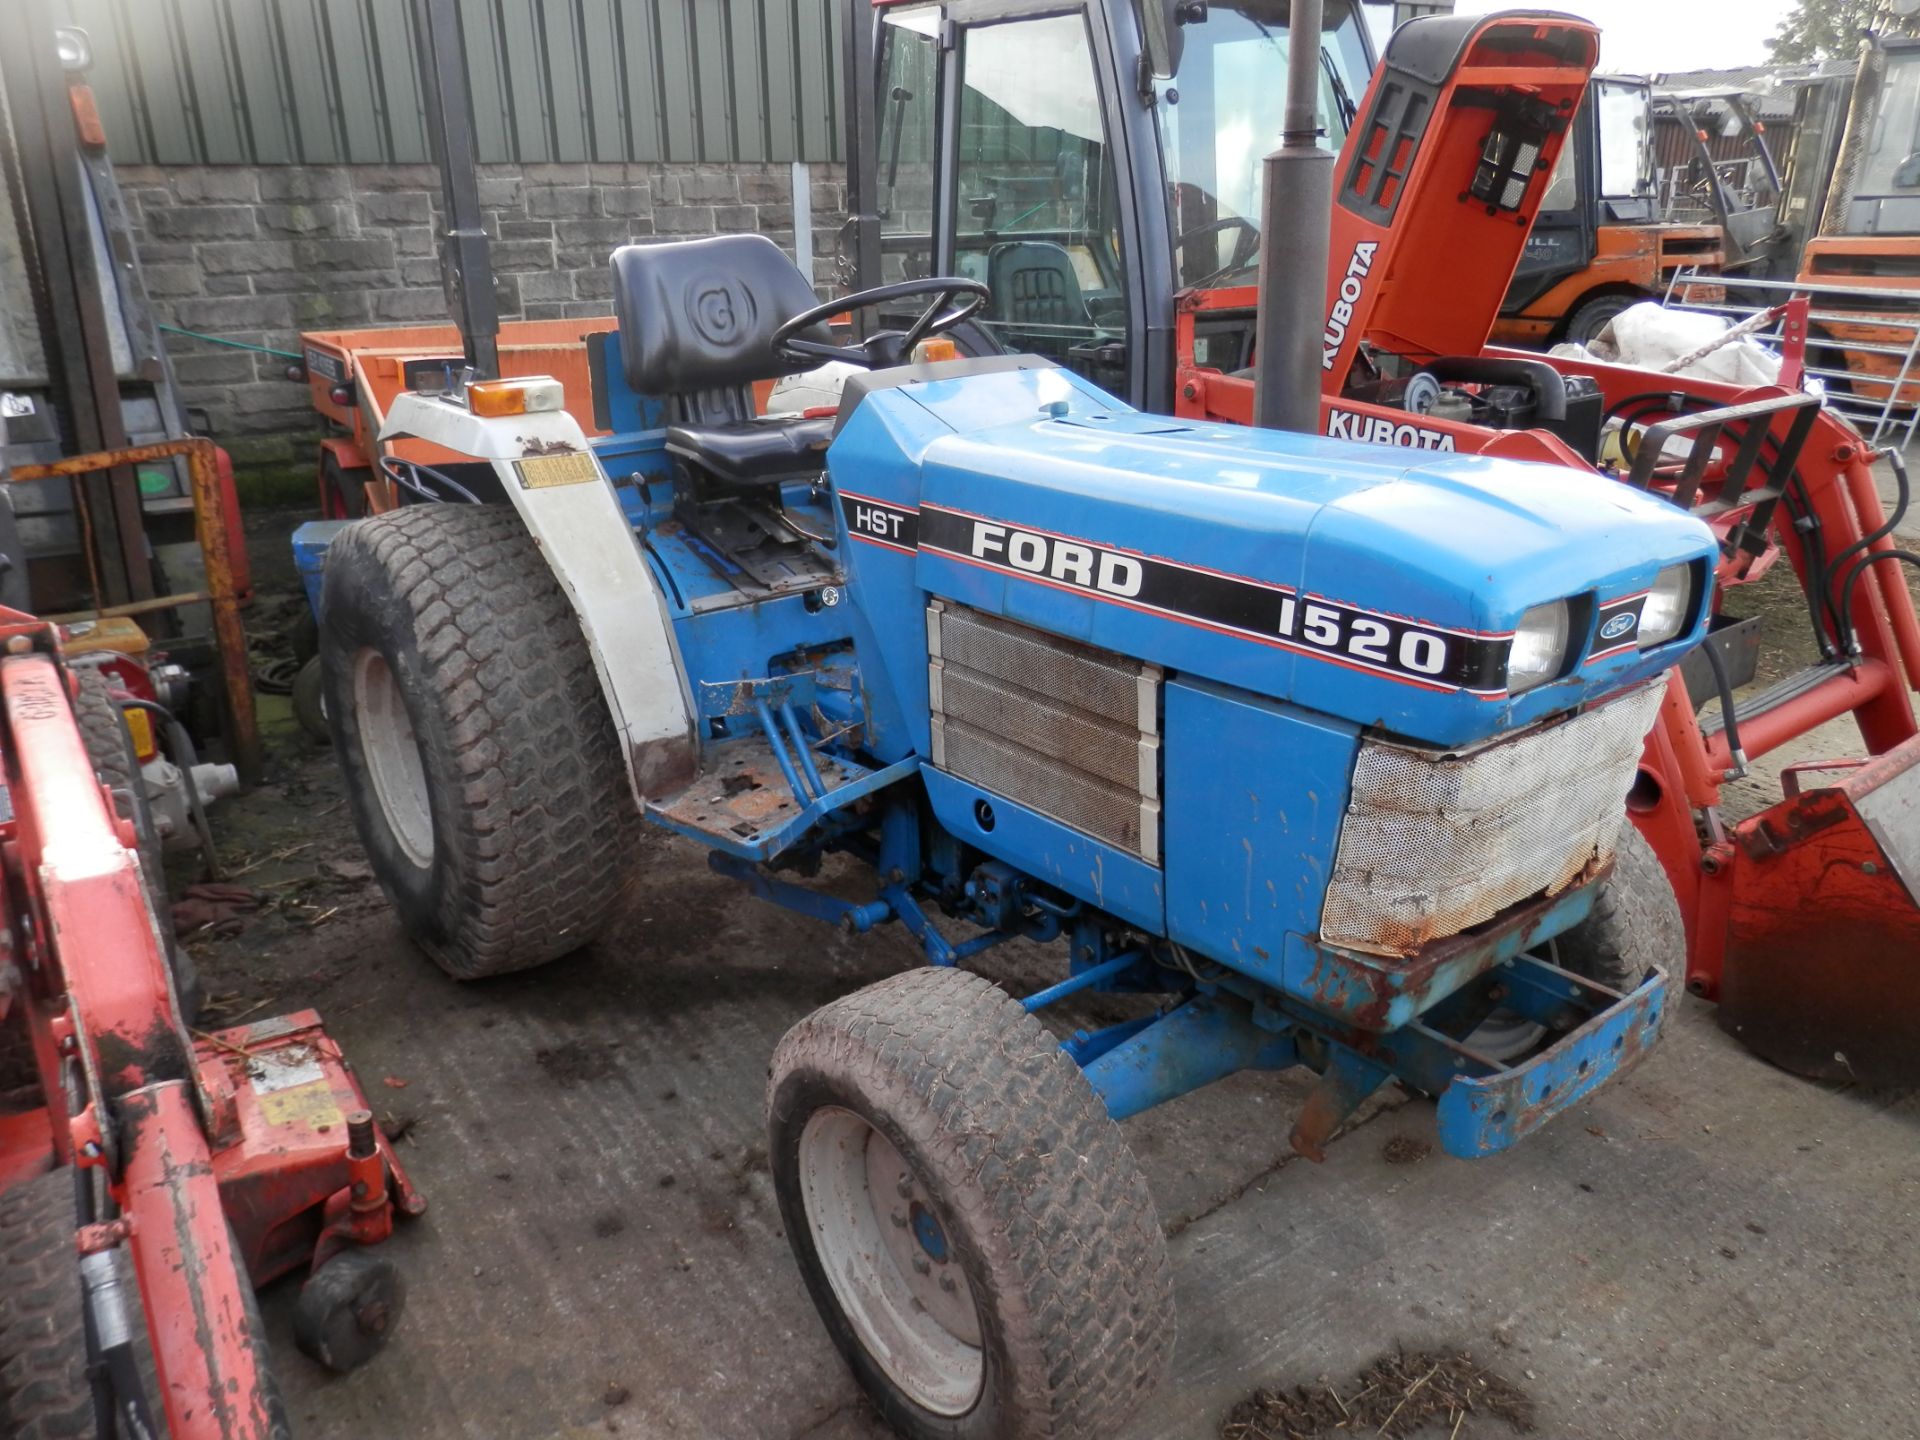 DS - 1995 FORD 1520 COMPACT DIESEL TRACTOR, STARTS RUNS & DRIVES,READY TO USE.   COMPACT TRACTOR - Bild 5 aus 8